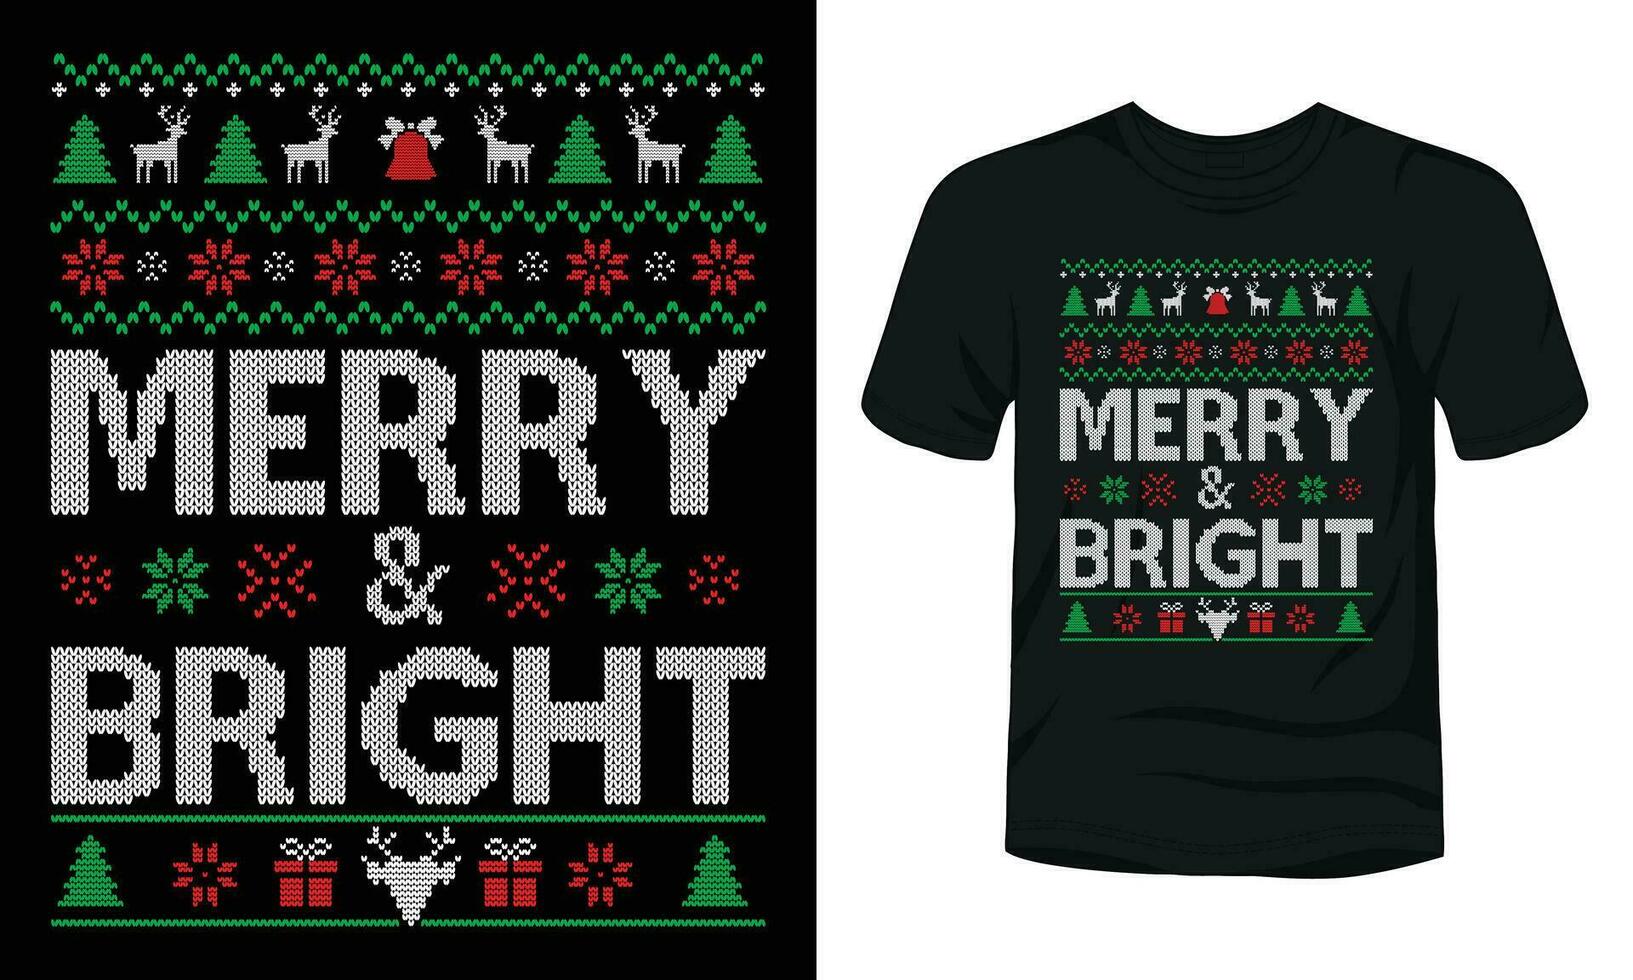 Merry and Bright Christmas t-shirt design vector